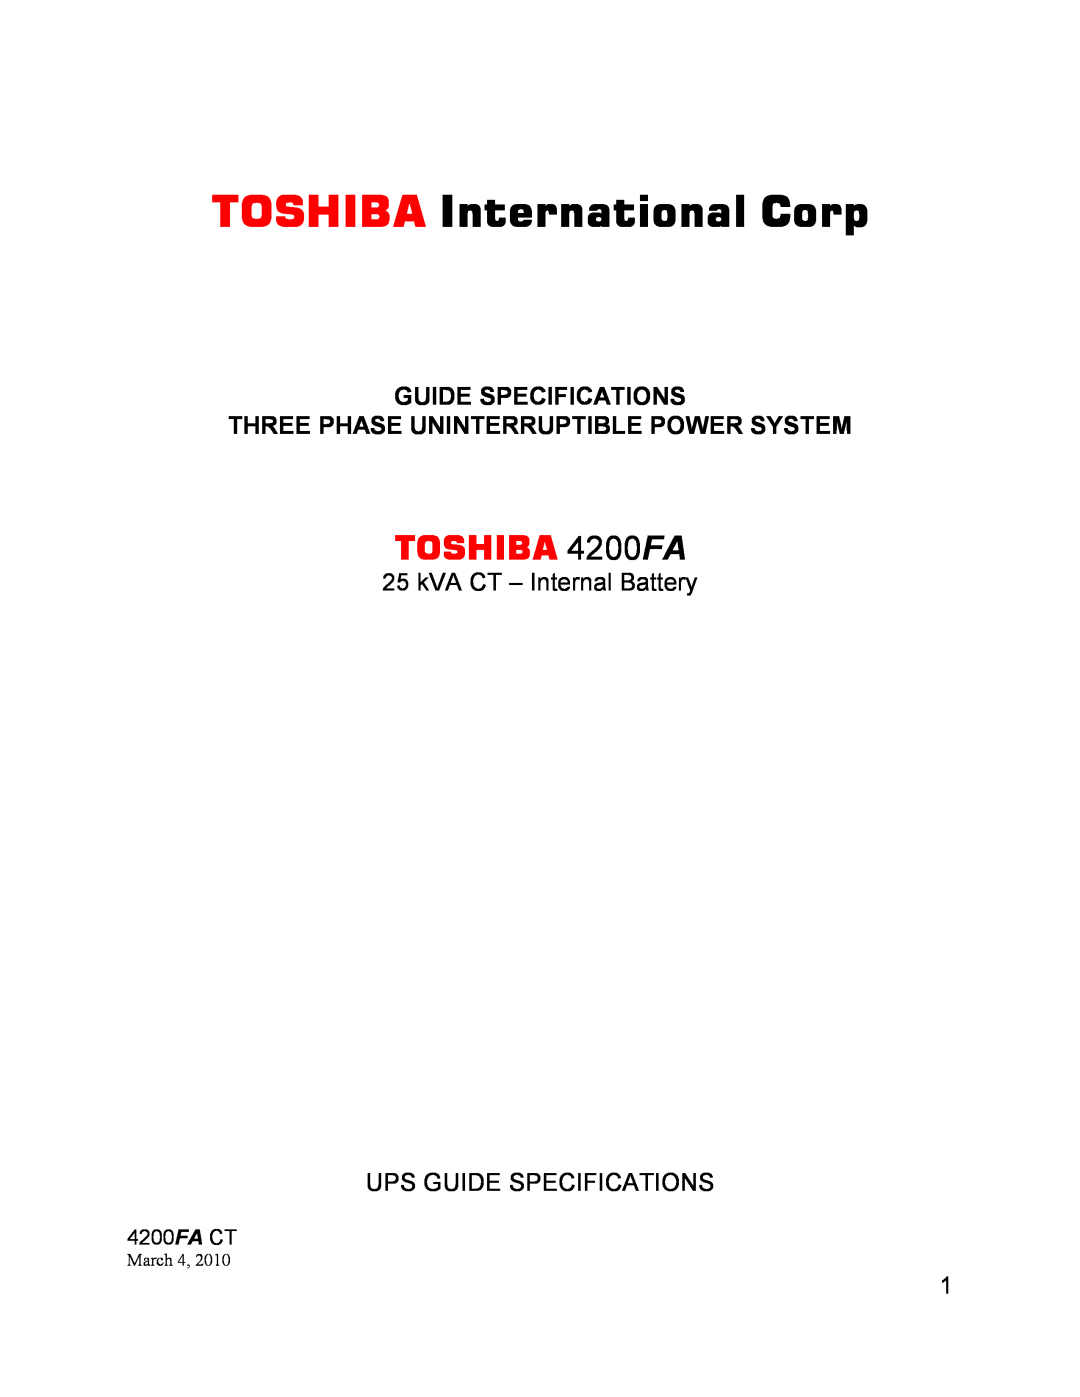 Toshiba 4200FA CT specifications kVA CT - Internal Battery UPS GUIDE SPECIFICATIONS, TOSHIBA International Corp, March 4 